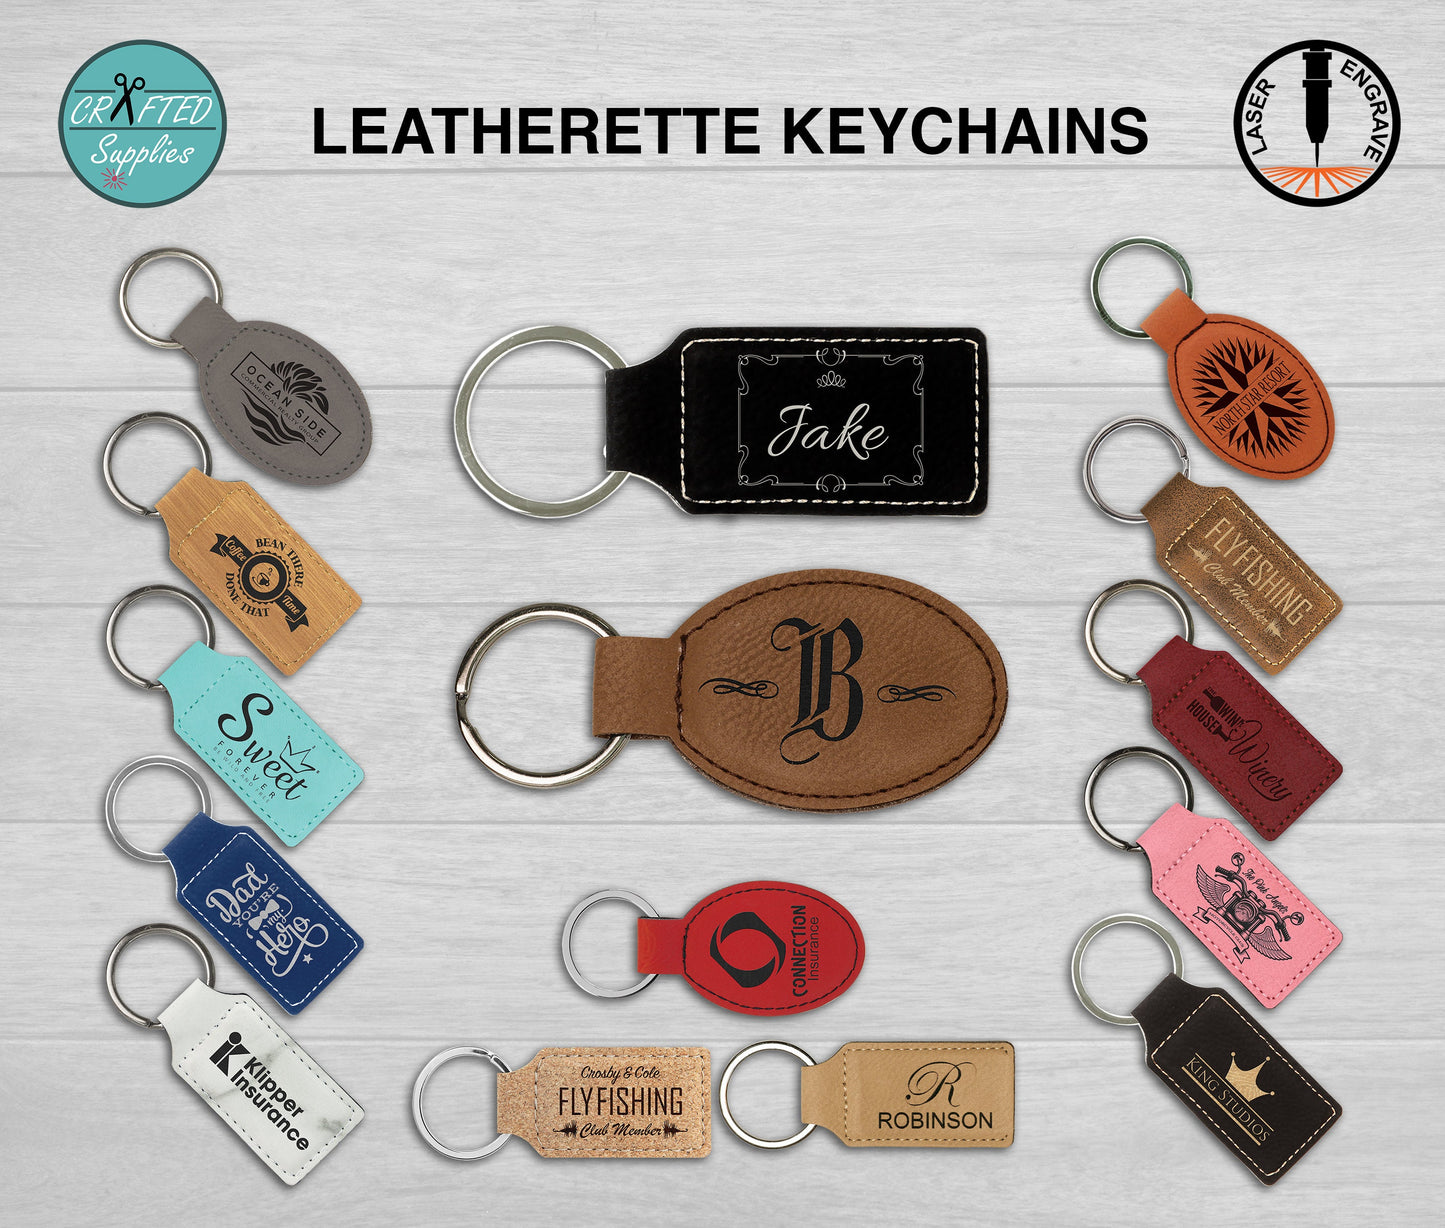 crafted supplies leatherette keychain